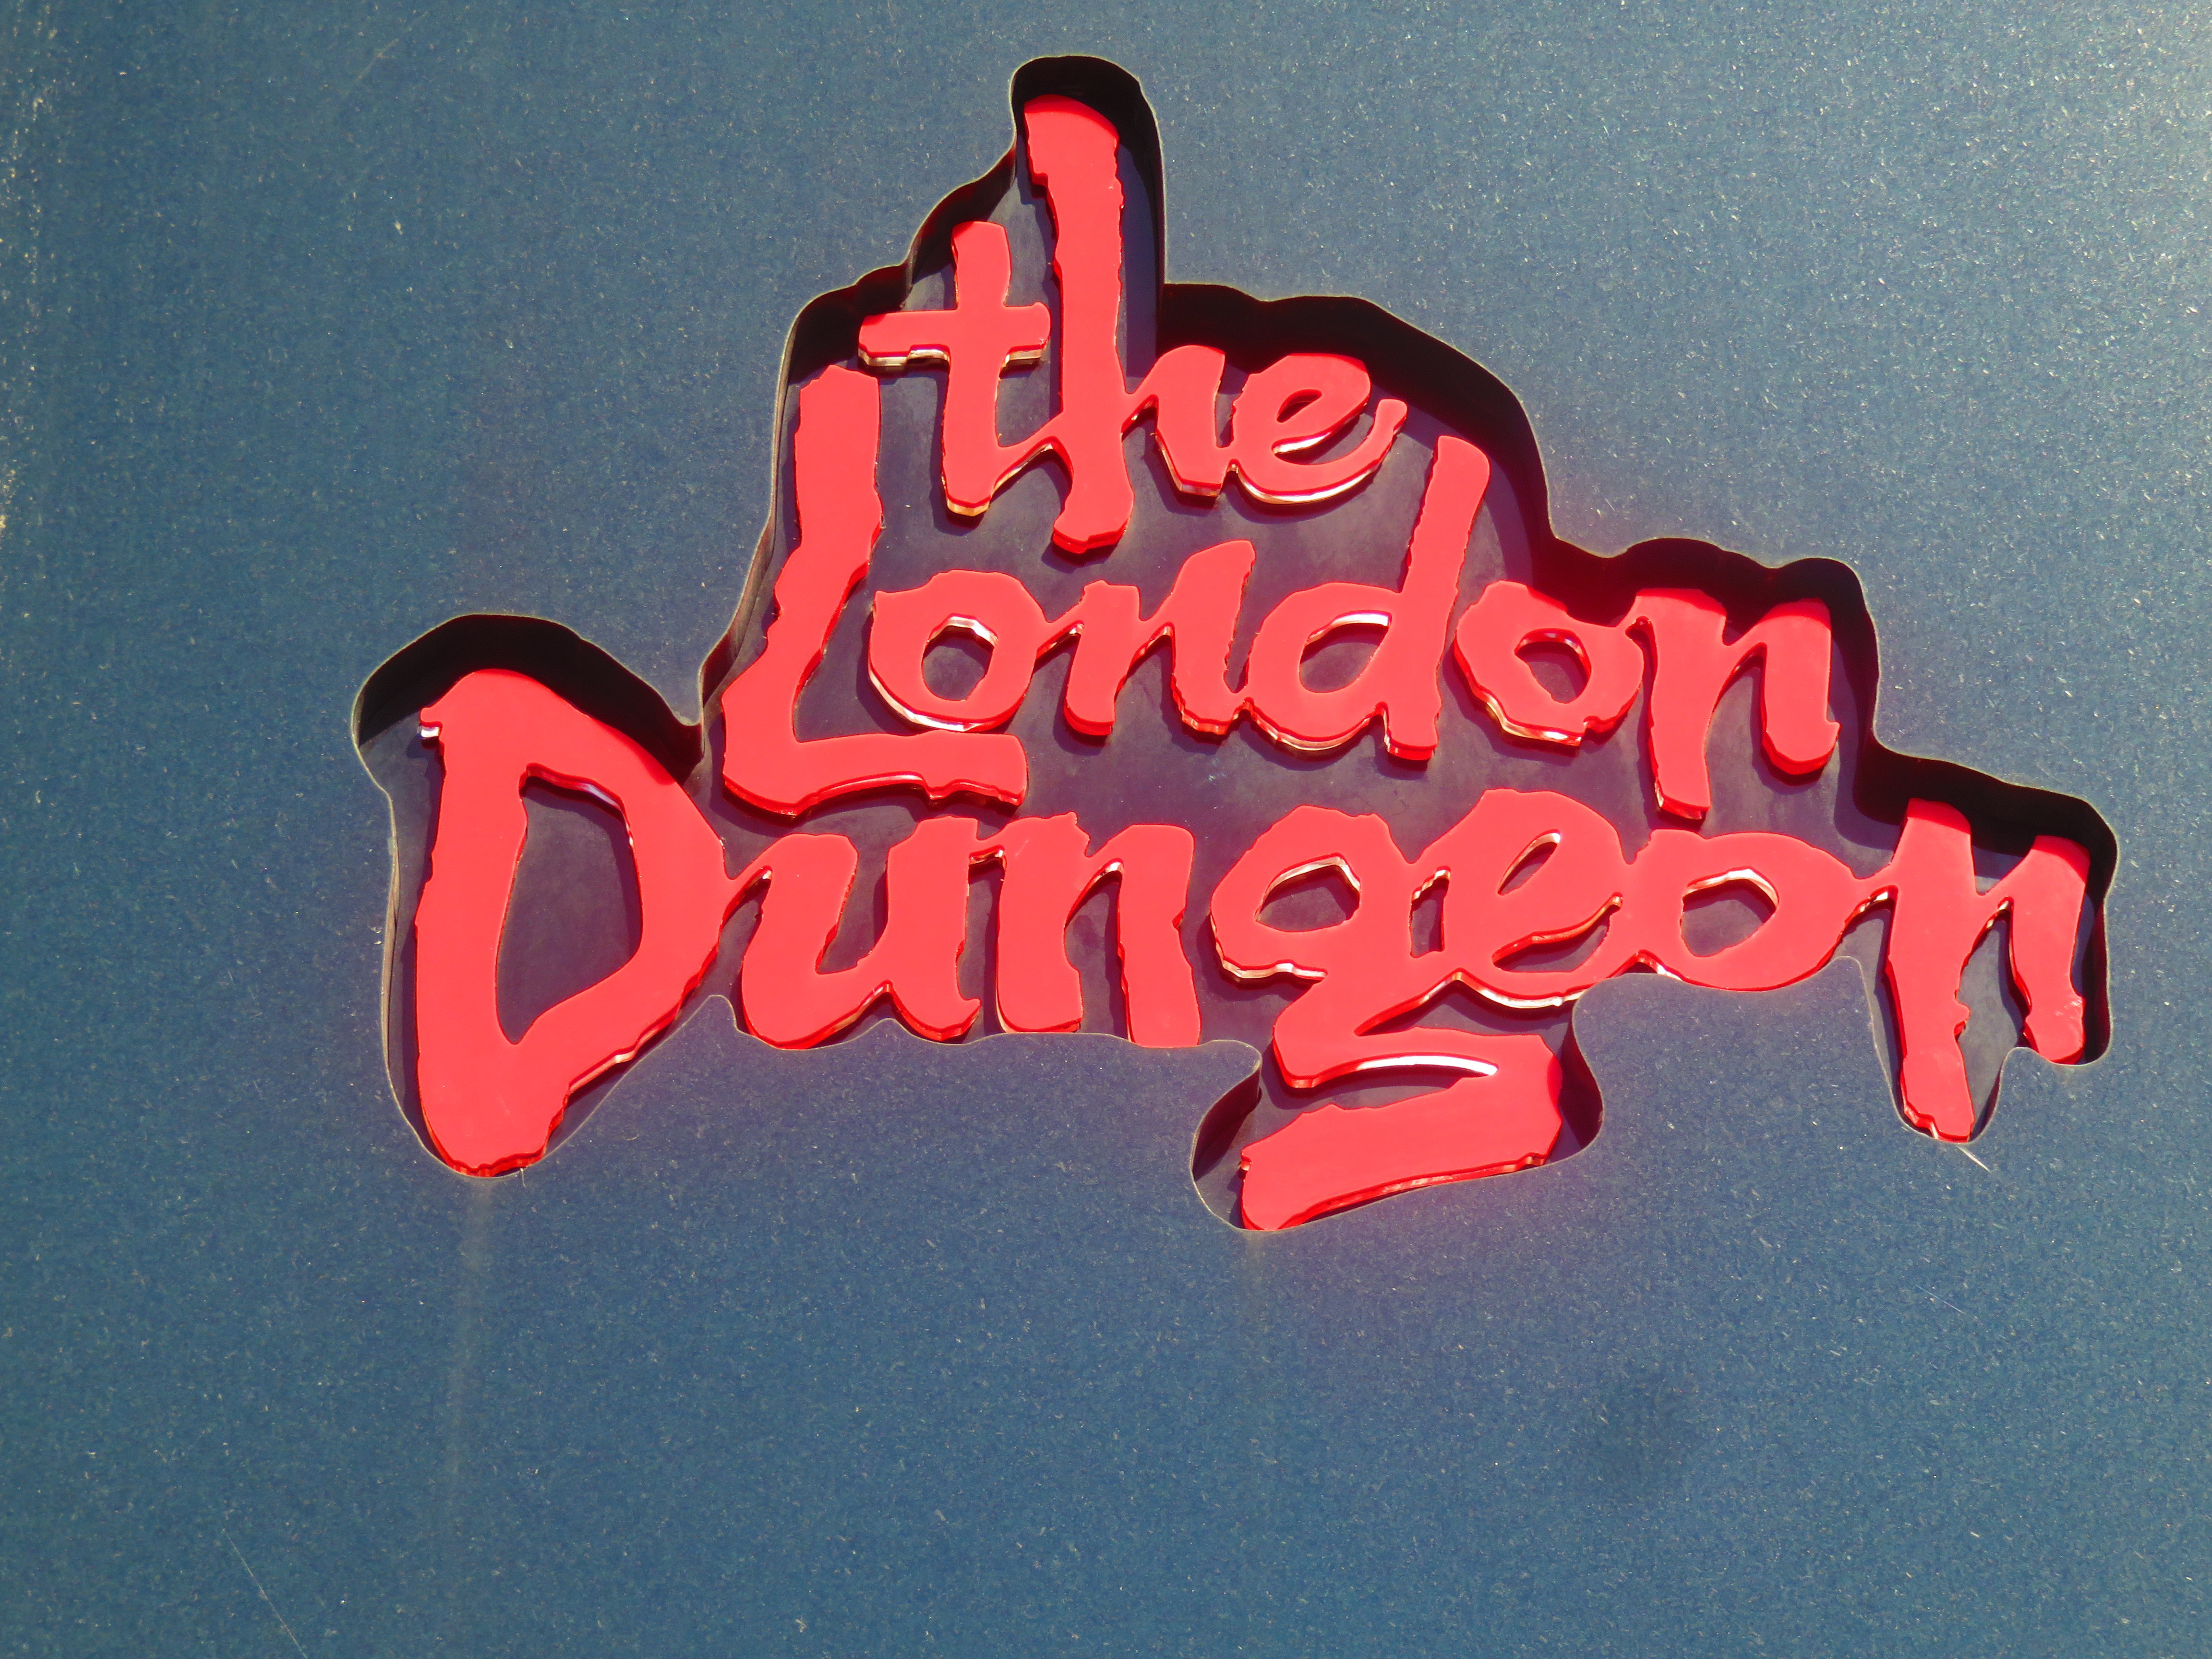 The London Dungeon: All year